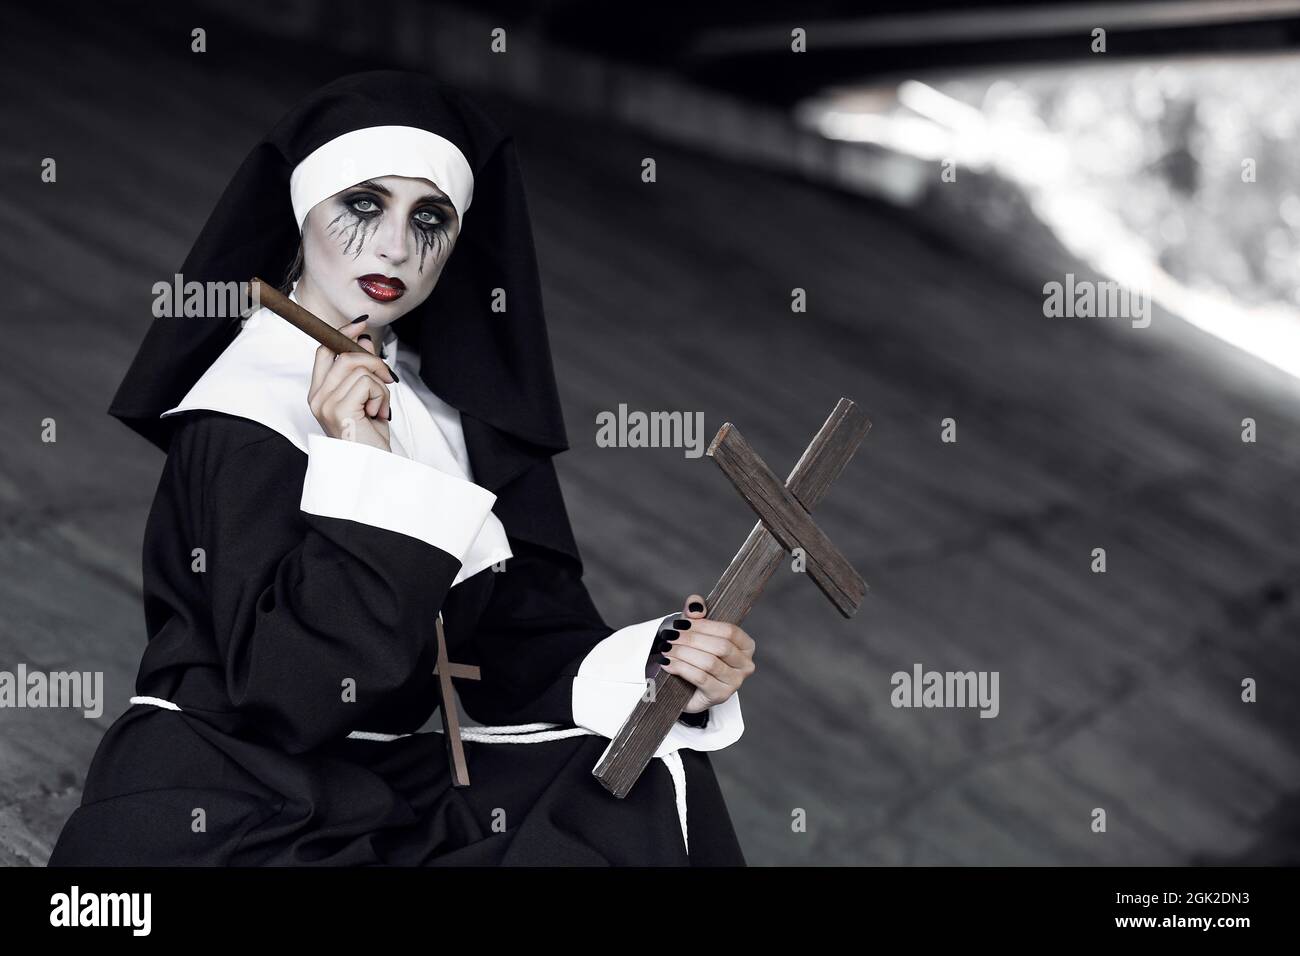 Portrait of woman dressed for Halloween as nun with cigar Stock Photo